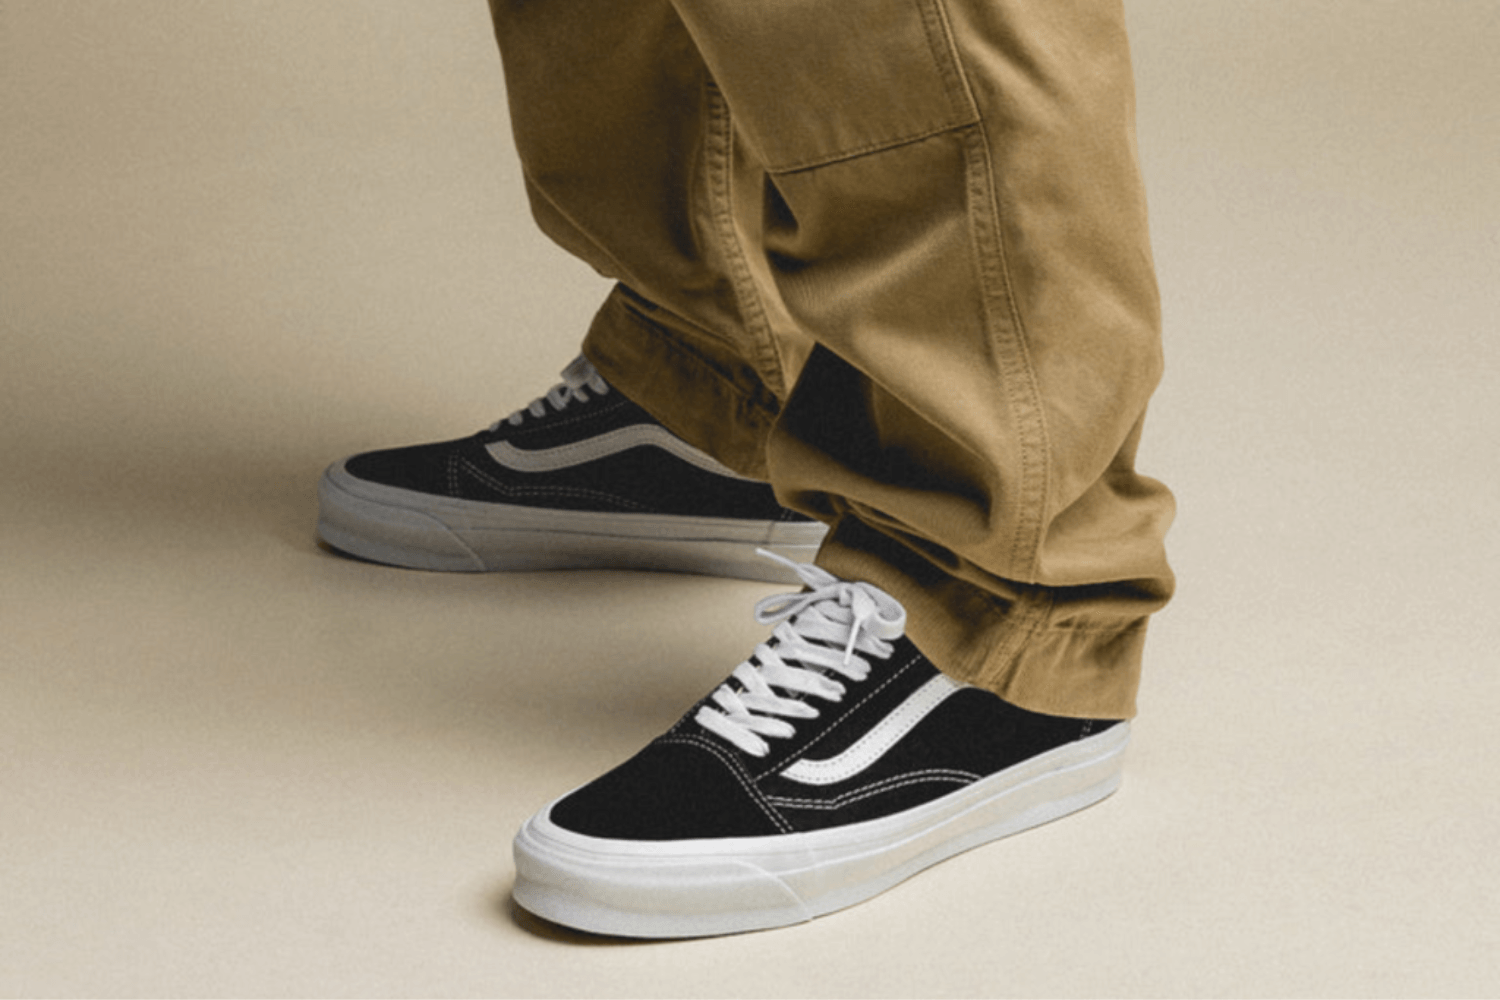 Know your size: Vans sizing guide